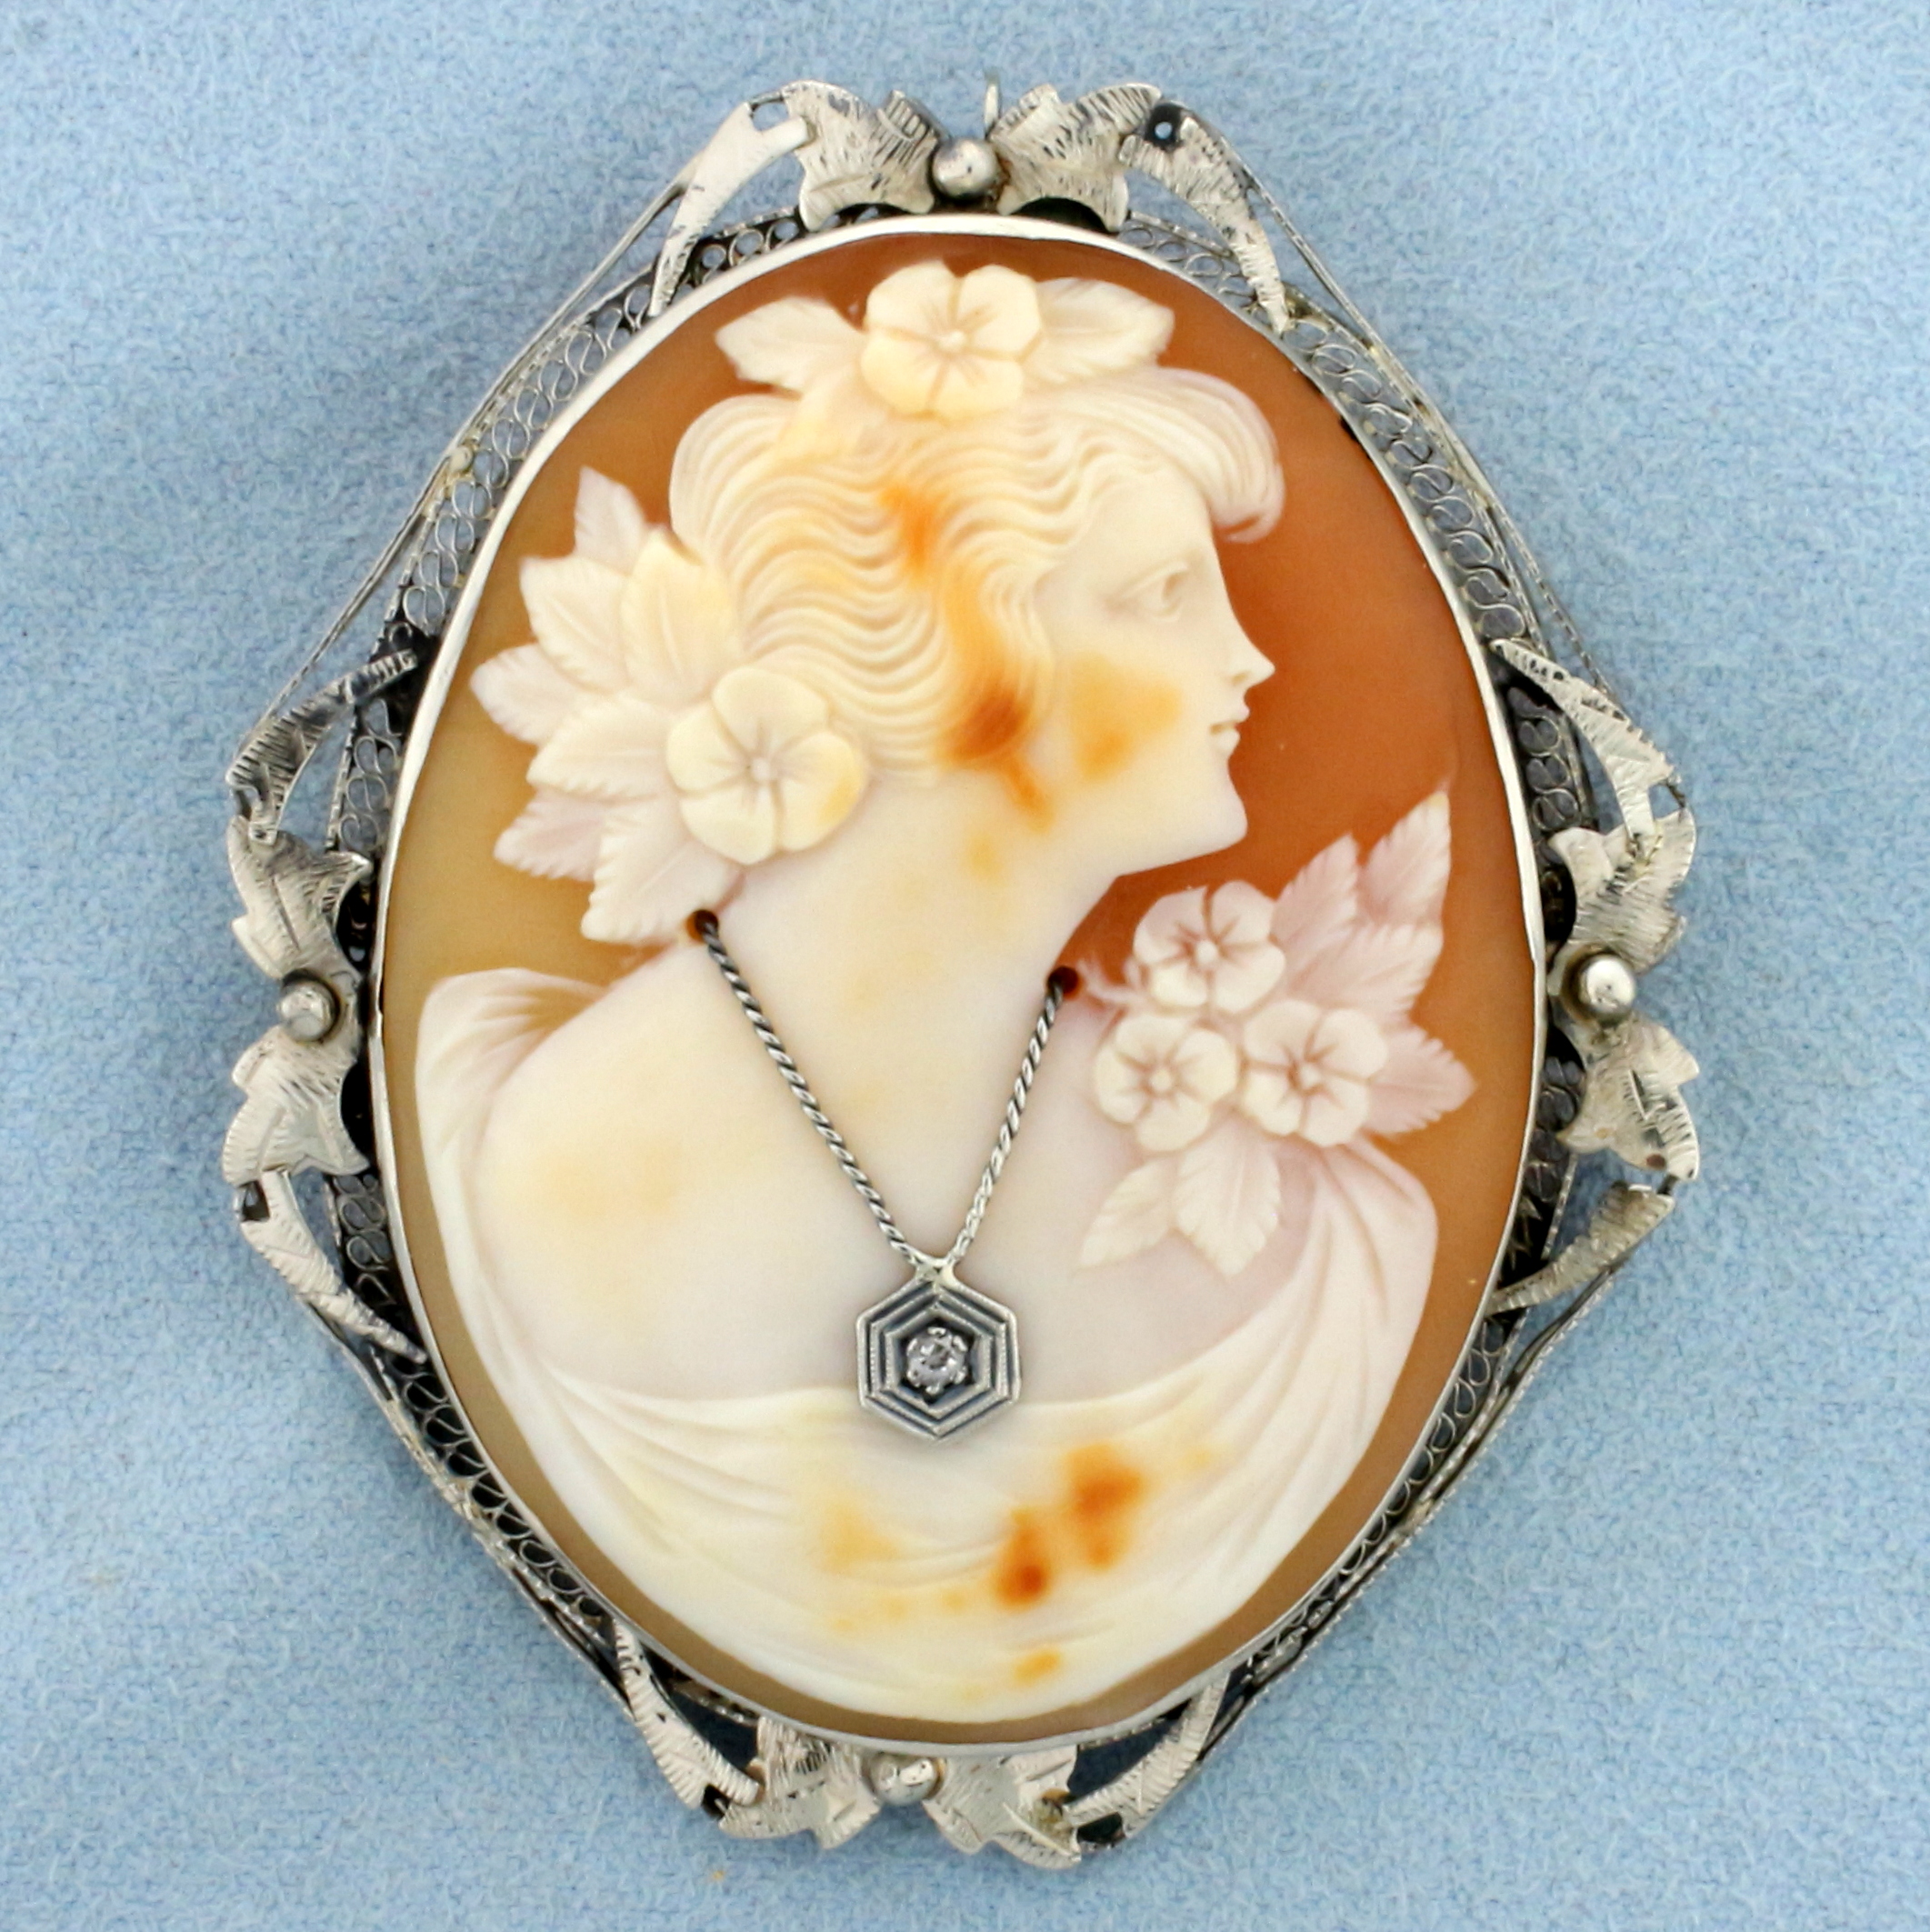 Rare Antique Oval Shell Cameo 14K Gold Filigree Frame Lady With Diamond  Brooch / Pendent 1920s - Etsy